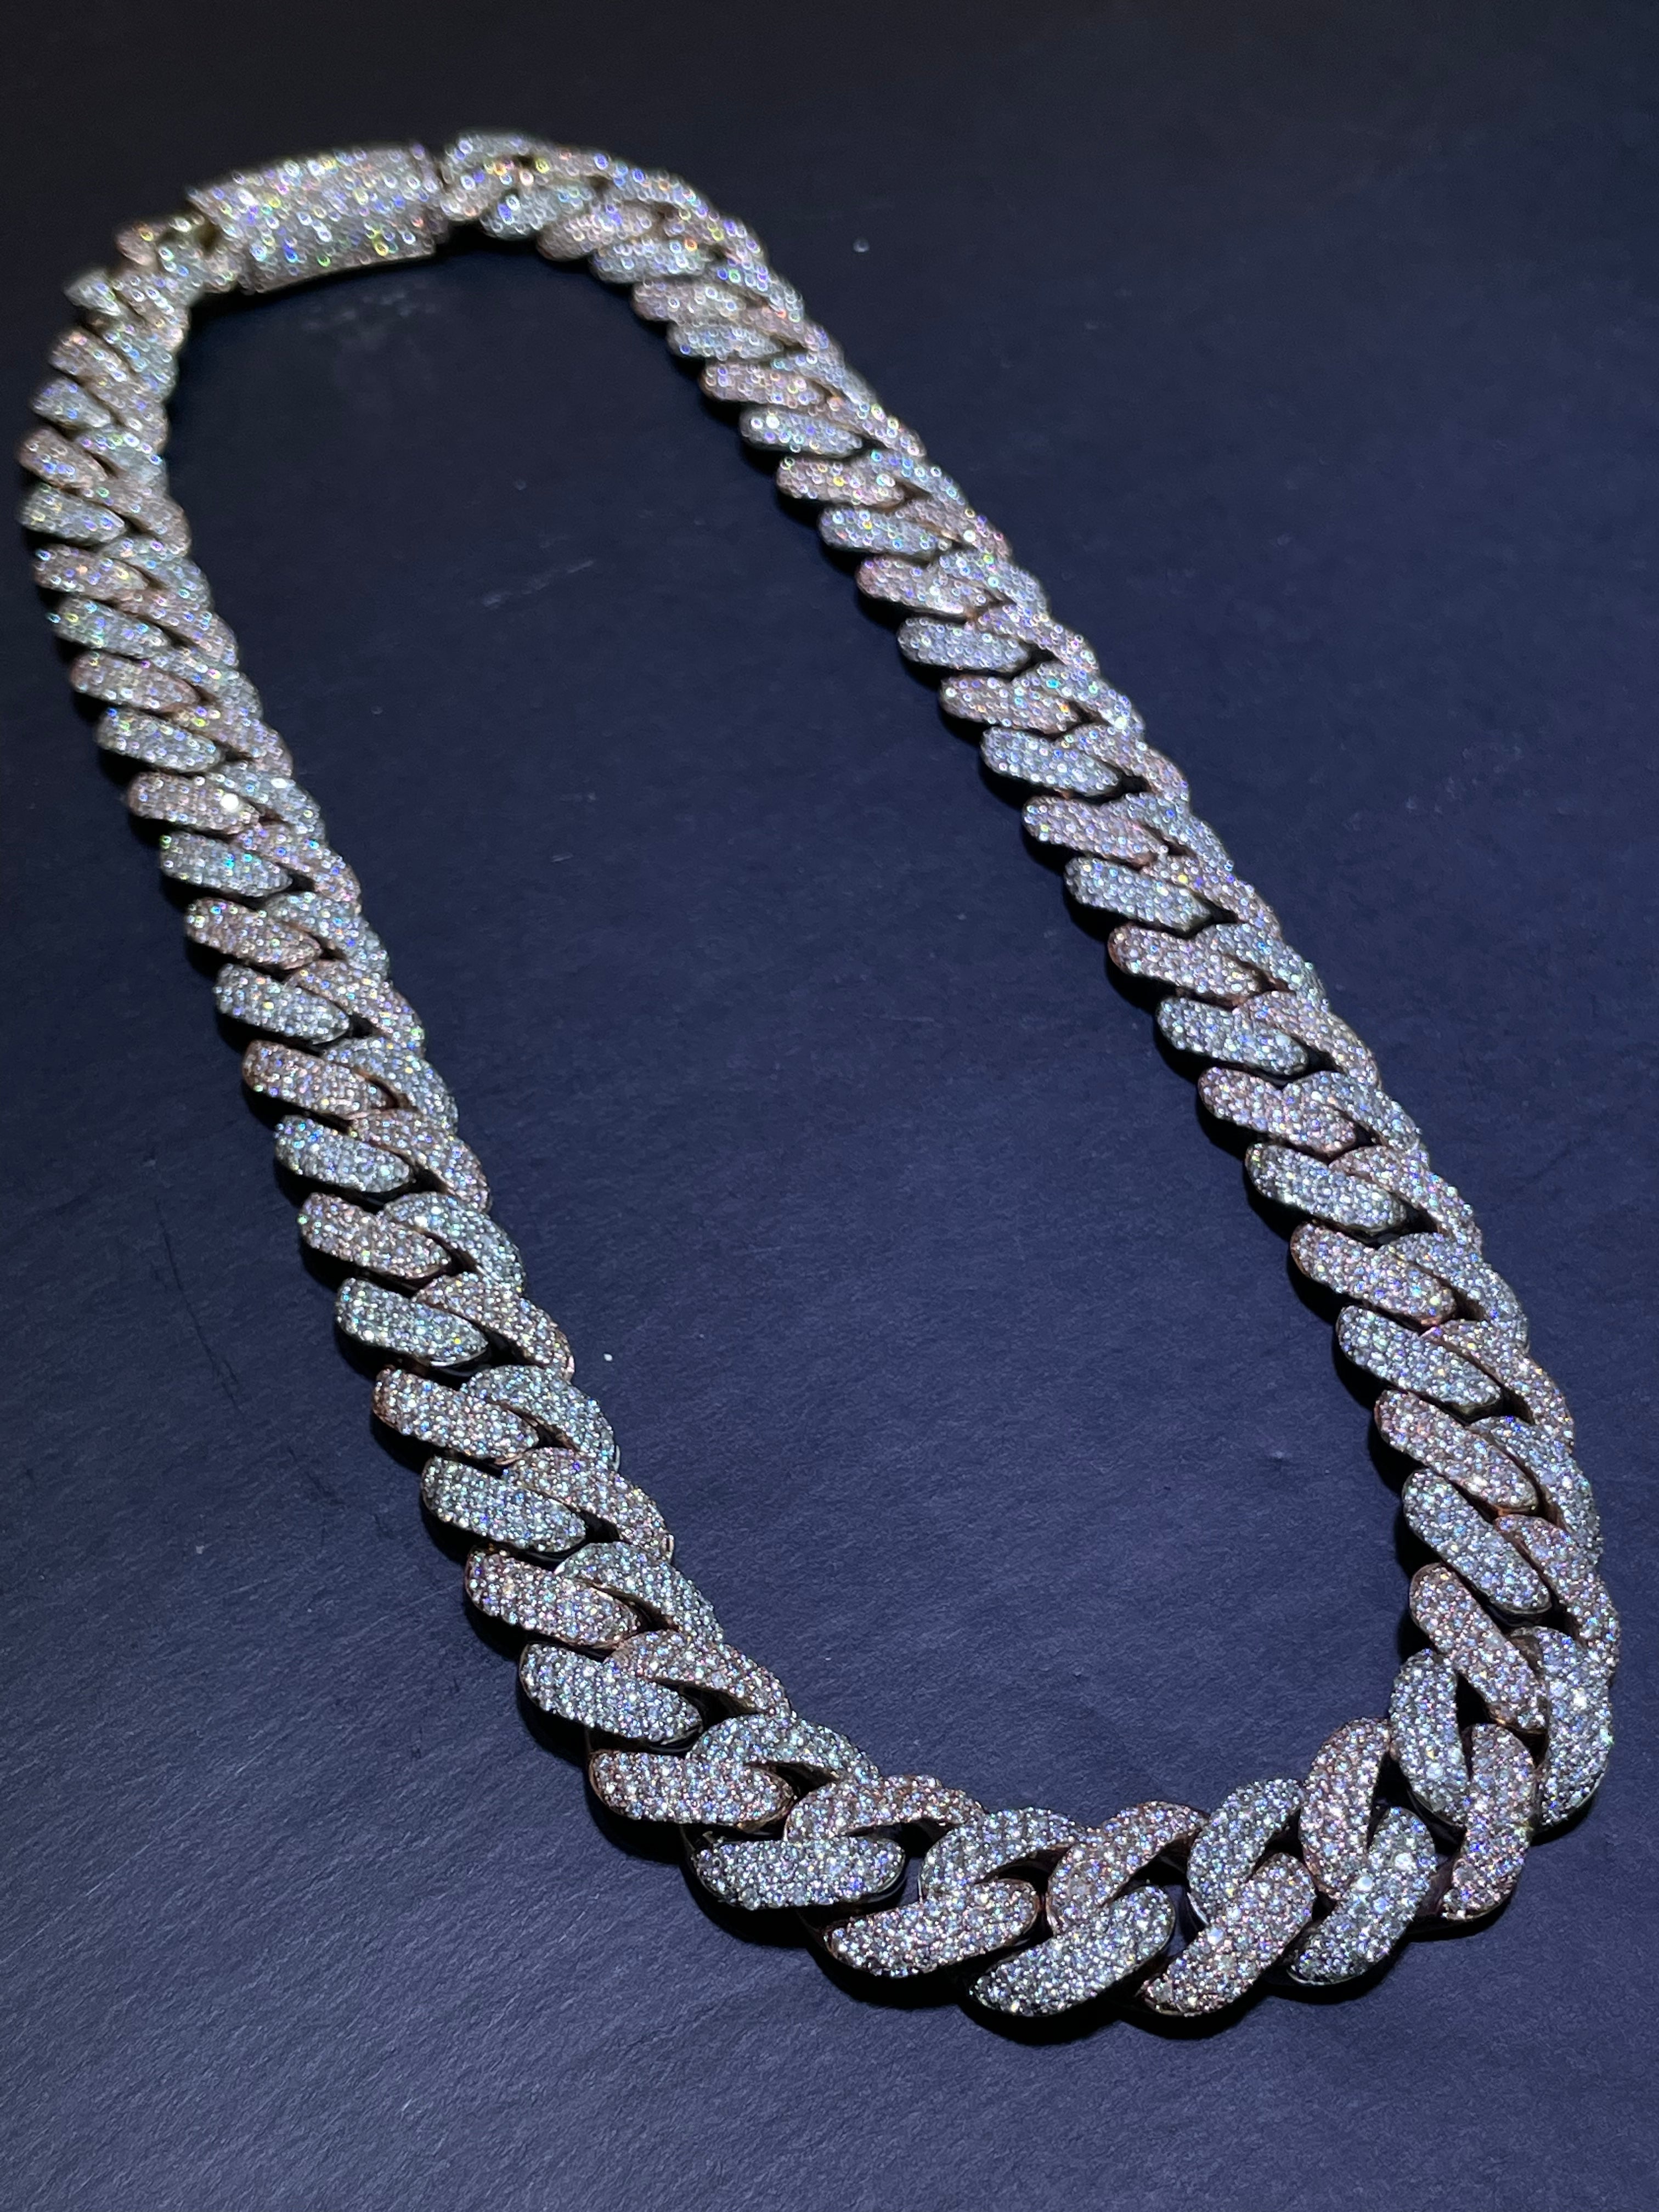 14k "Iced Out Miami Cuban Link" Necklace VVS1 44 CTs t.w. Rose/White  ”iced diamond “ 273 grams 14k Gold. 16mm